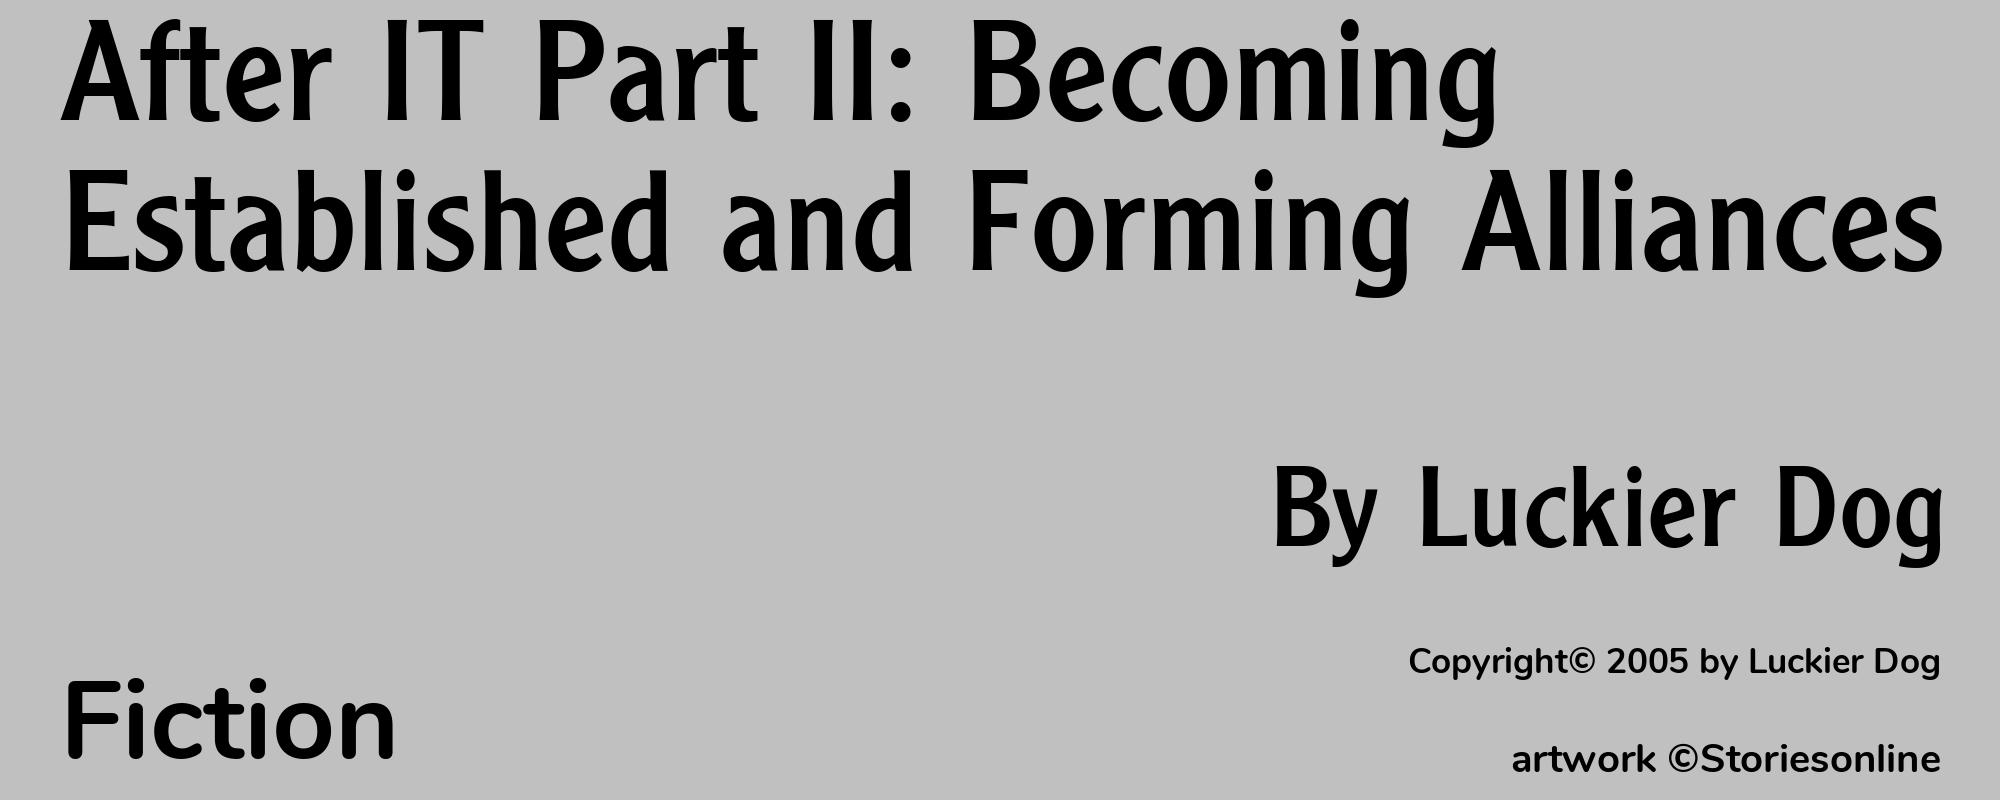 After IT Part II: Becoming Established and Forming Alliances - Cover